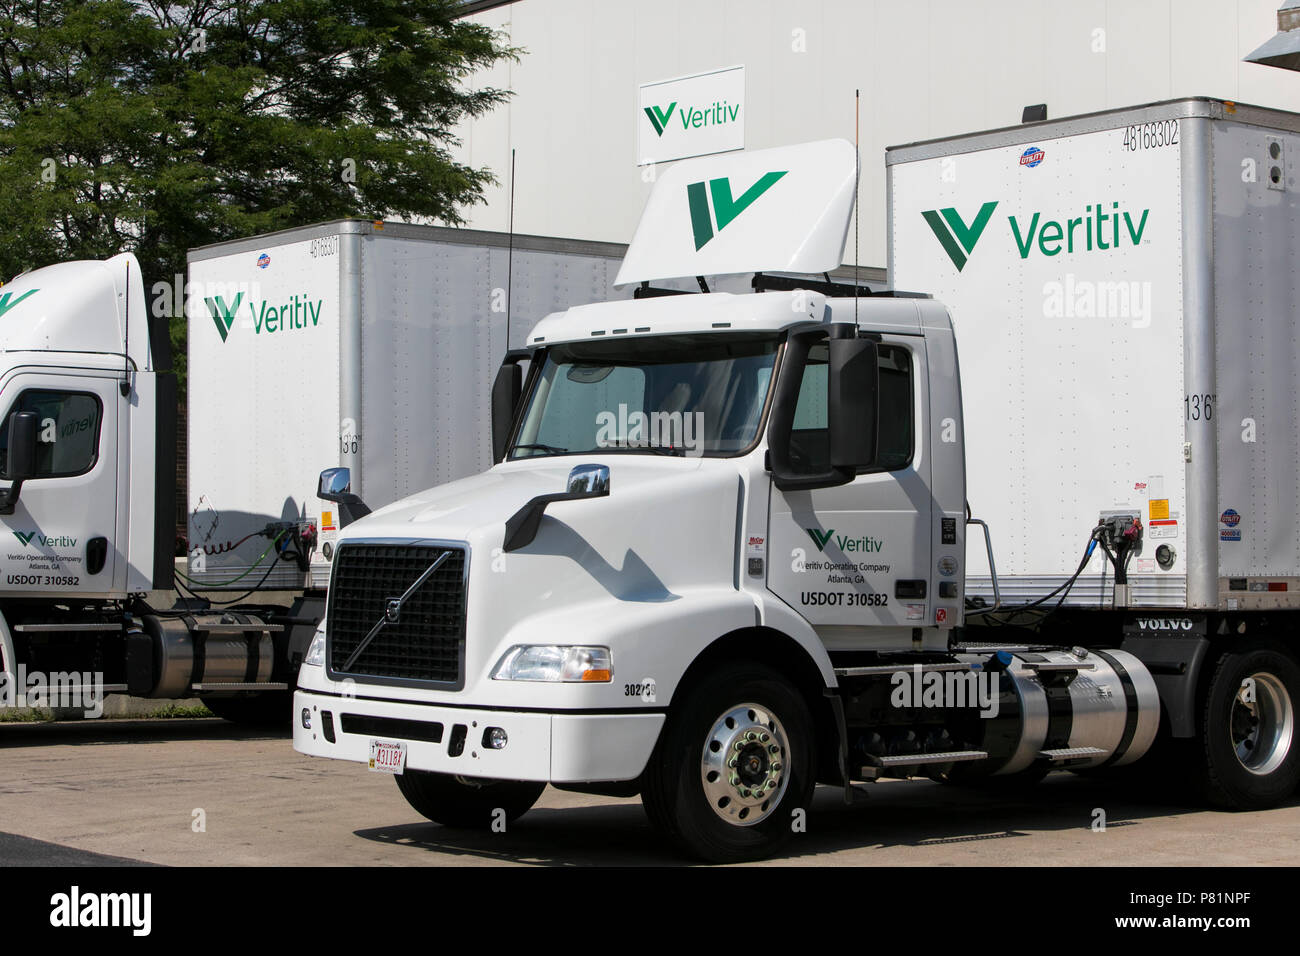 Semi-trucks and trailers featuring Veritiv Corporation logos outside of a facility in Appleton, Wisconsin, on June 24, 2018. Stock Photo